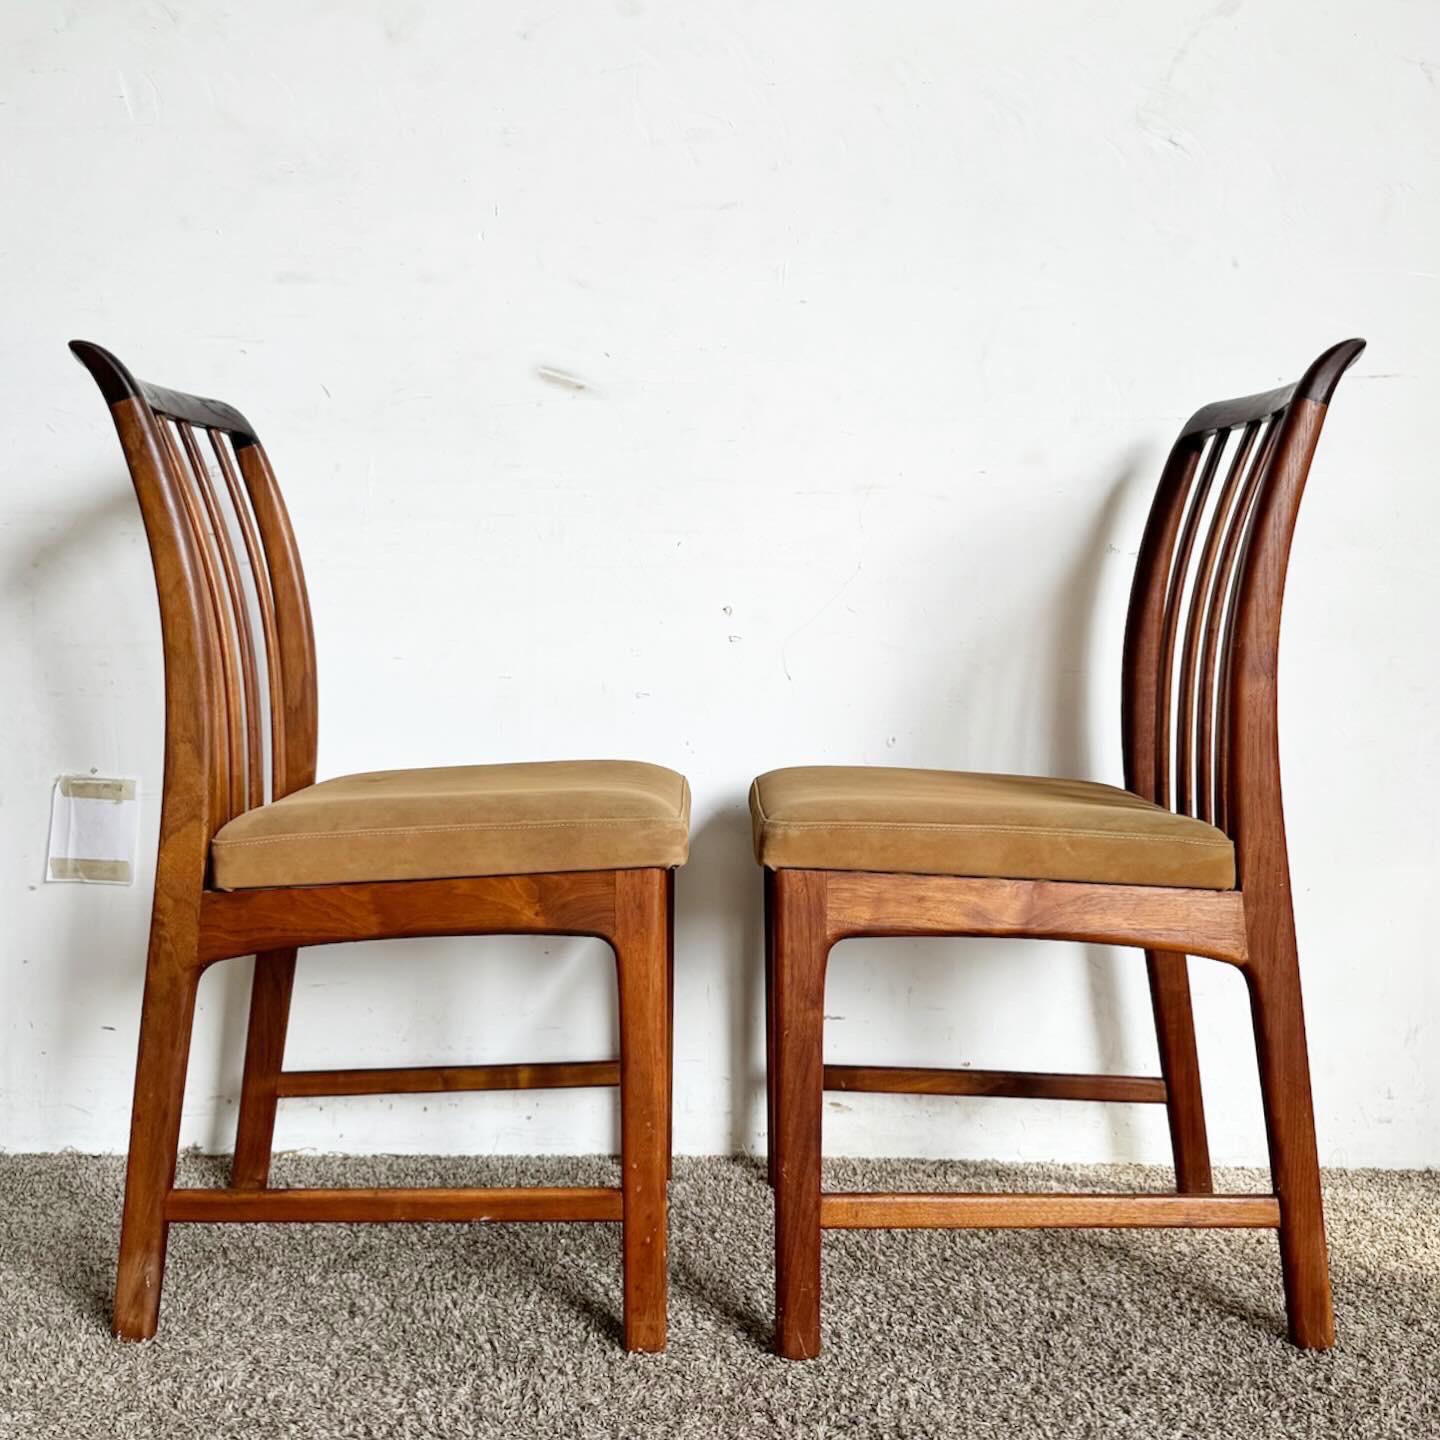 Vintage Scandinavian Modern Teak Dining Chairs by Folke Ohlsson for Dux Set of 6 In Good Condition For Sale In Delray Beach, FL